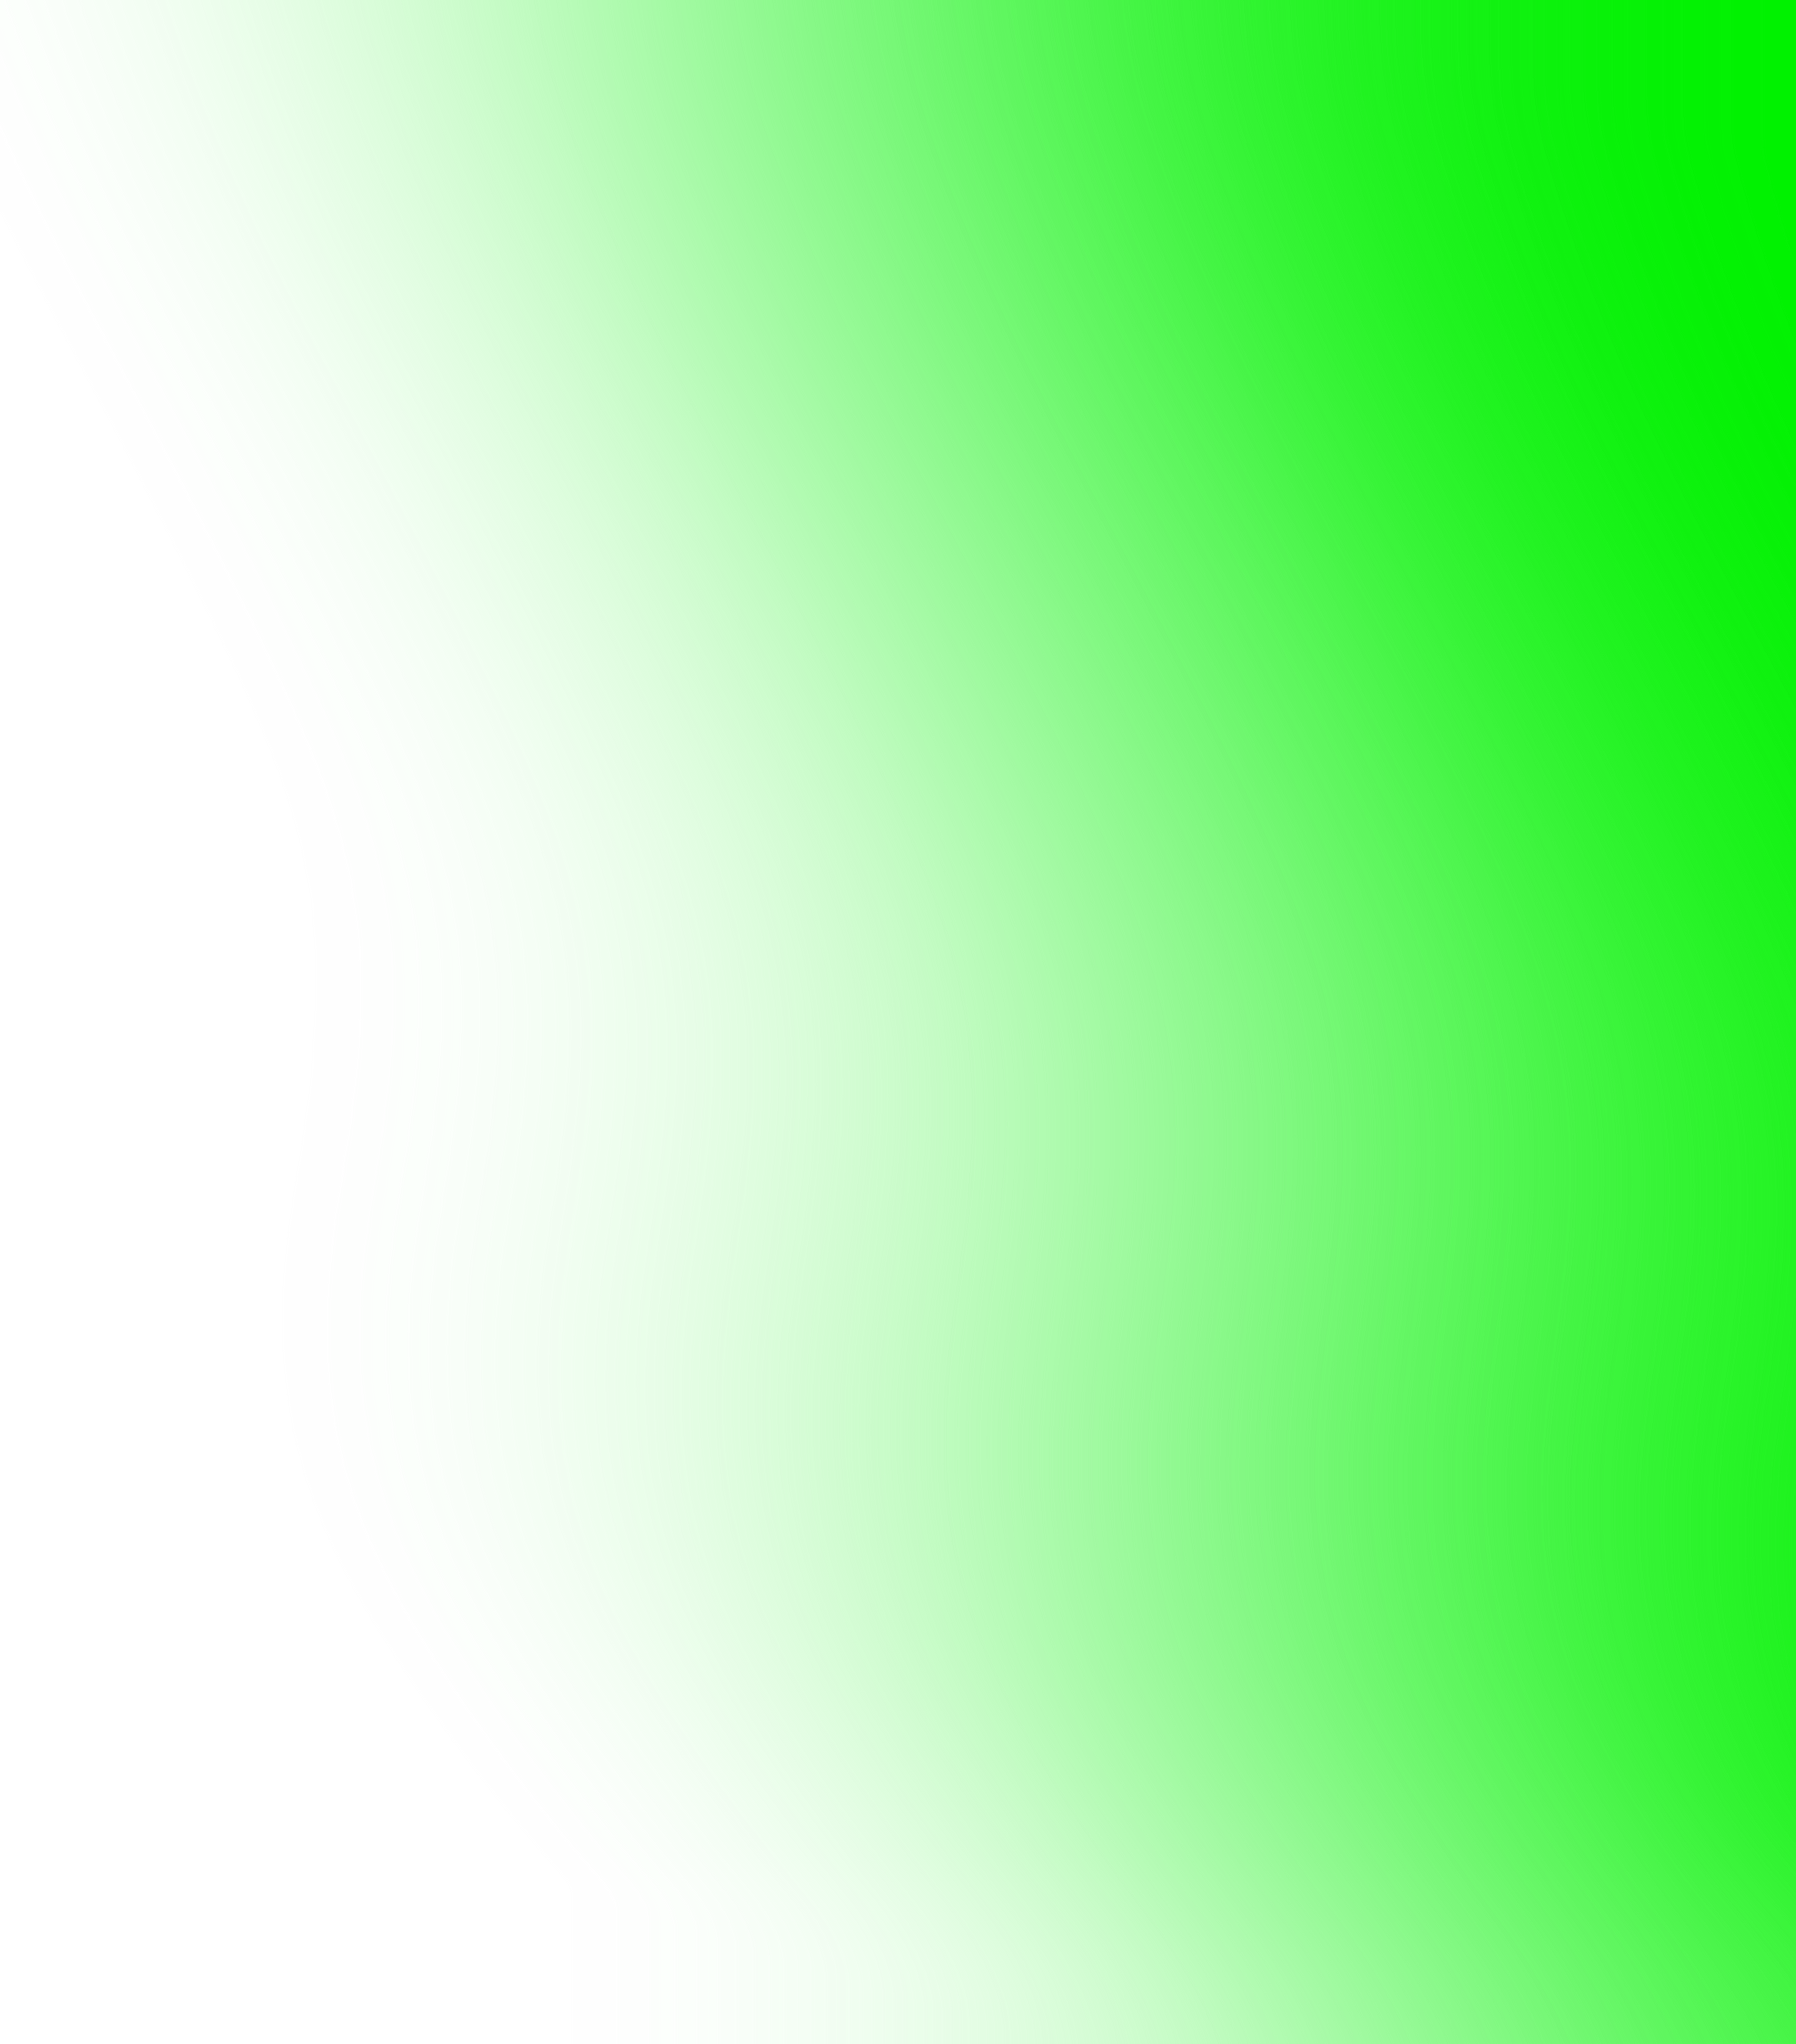 Green Gradient Transparency Fade